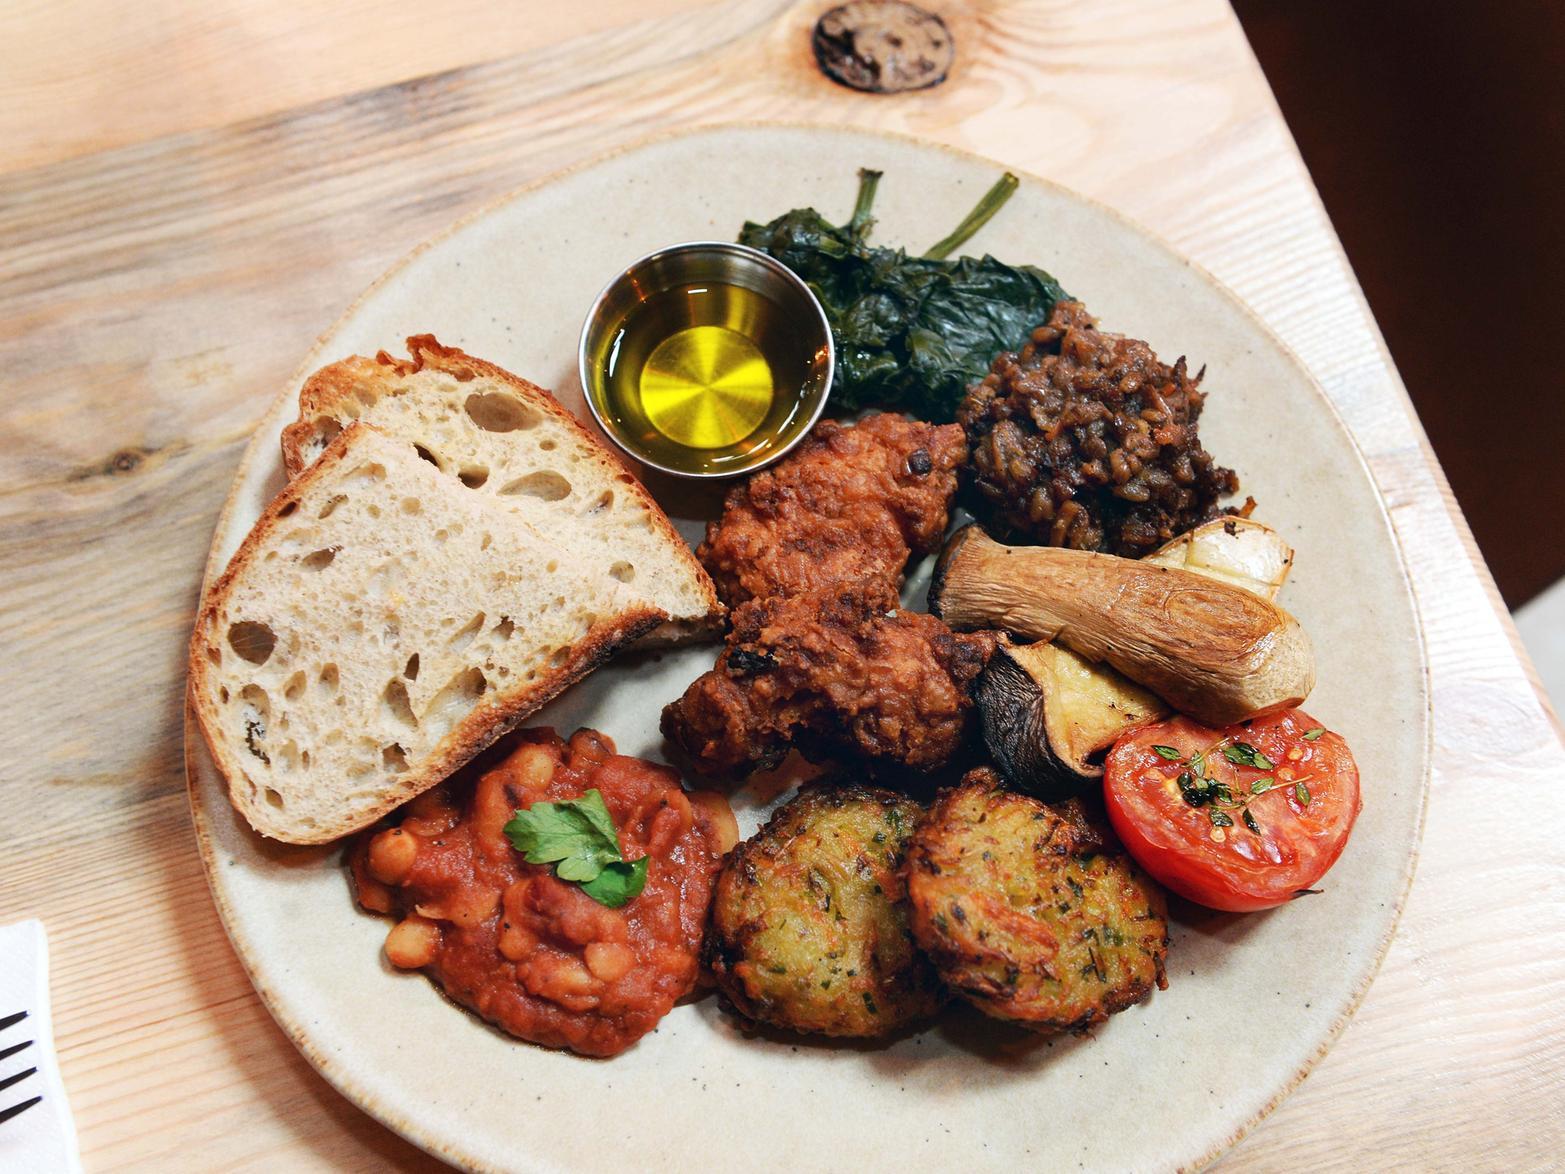 13 of the best vegetarian and vegan restaurants to visit in and around Halifax